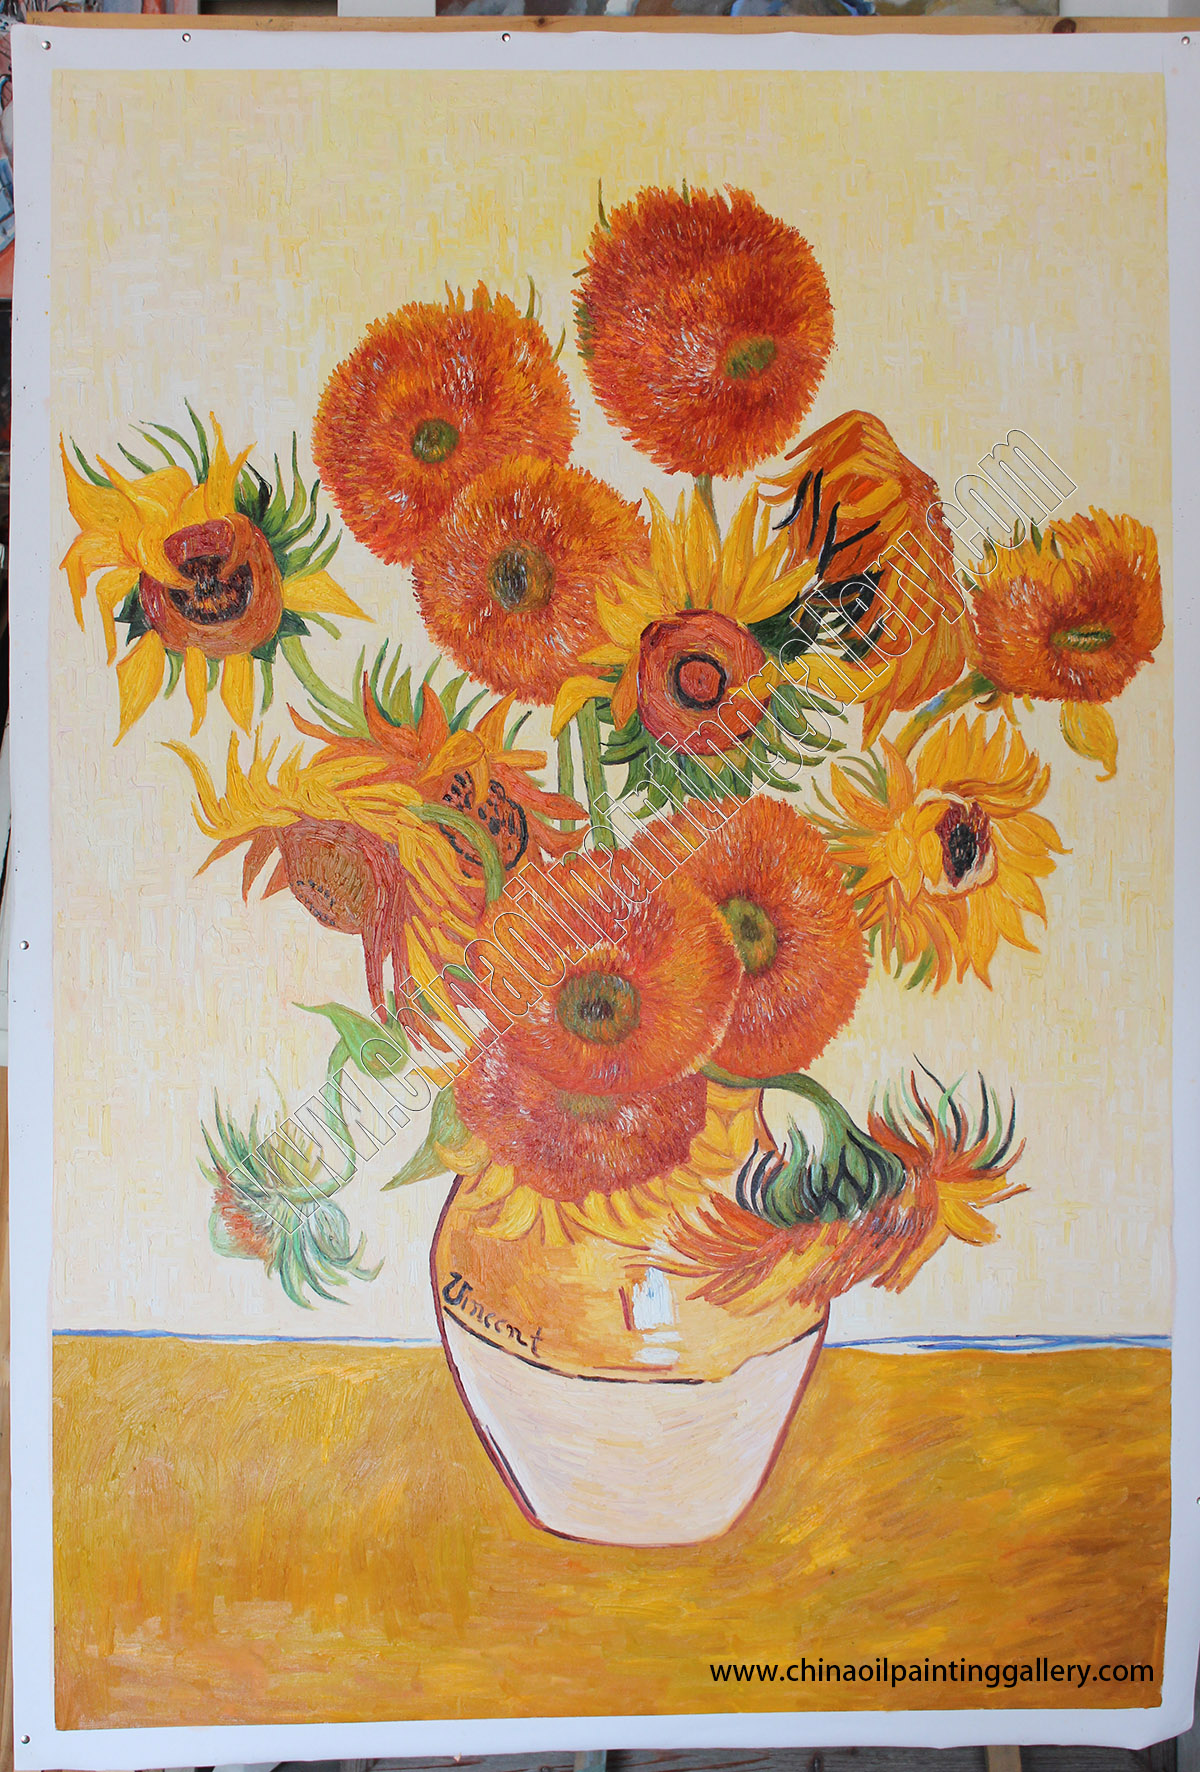 Vincent van Gogh Sunflowers - Oil painting reproductions 8